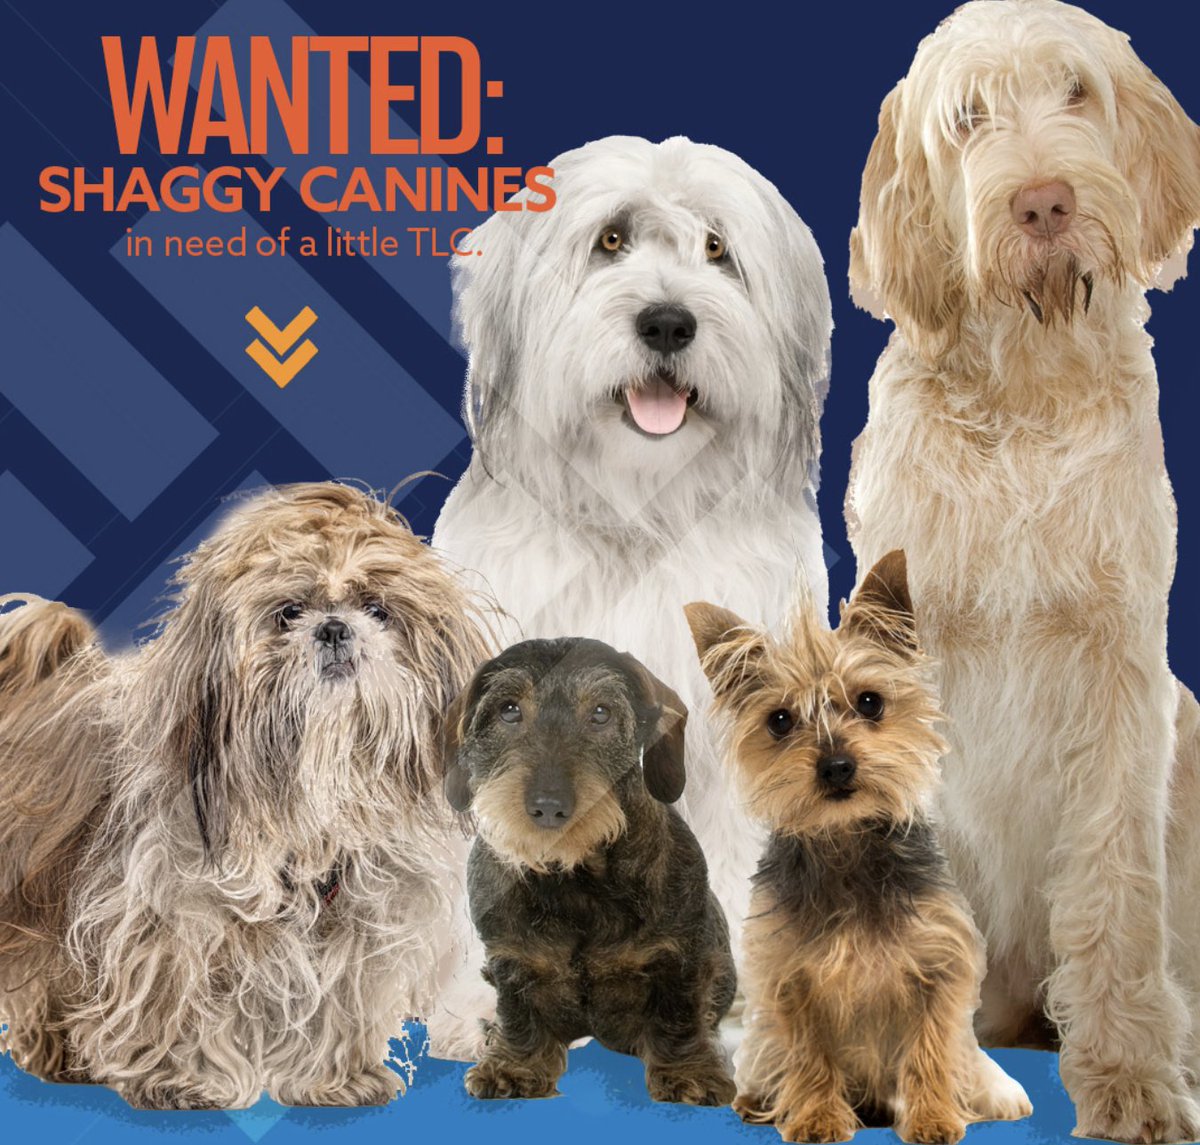 Canine clients wanted! FREE bath, brush, trim by Harford's Dog Grooming program. Day/eve appointments avail. Rabies vaccination required. hccgrooming@gmail.com to schedule appointment.